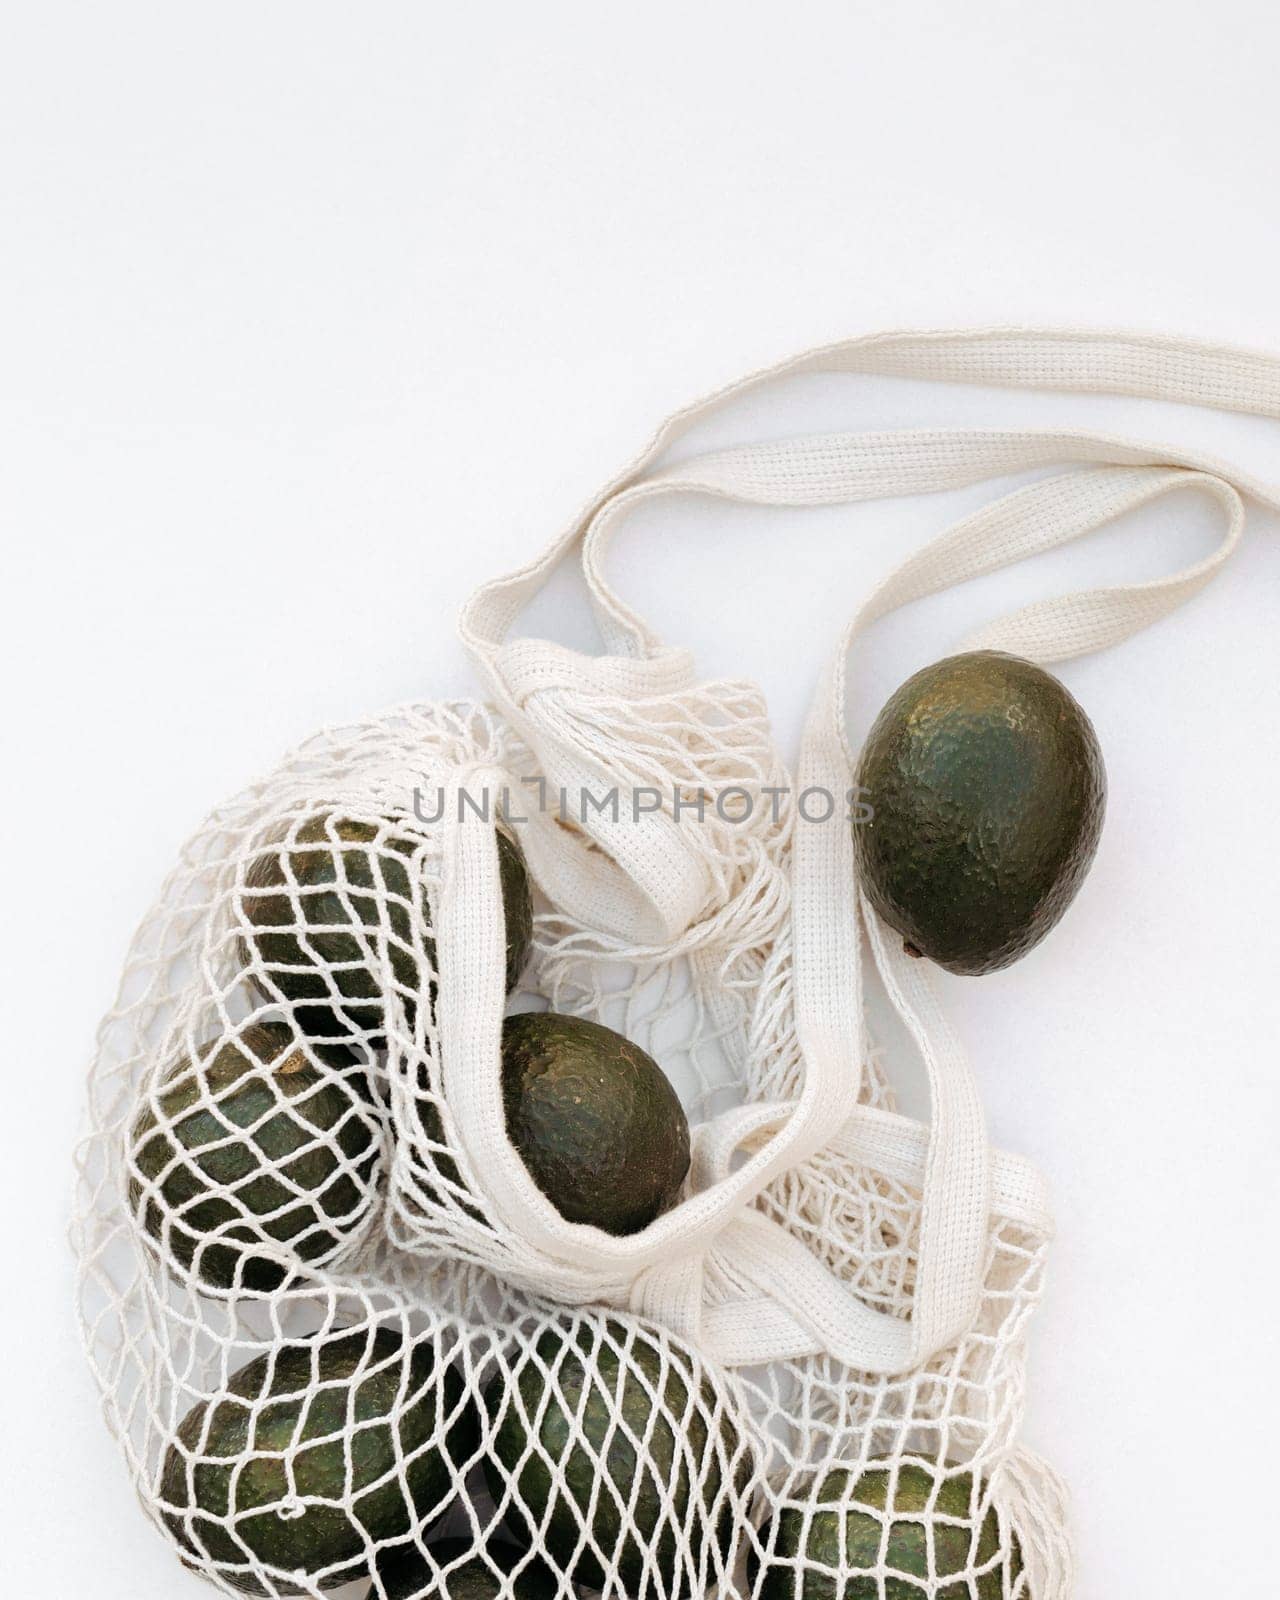 Avocados in a white net bag on a clean background, emphasizing sustainability by apavlin